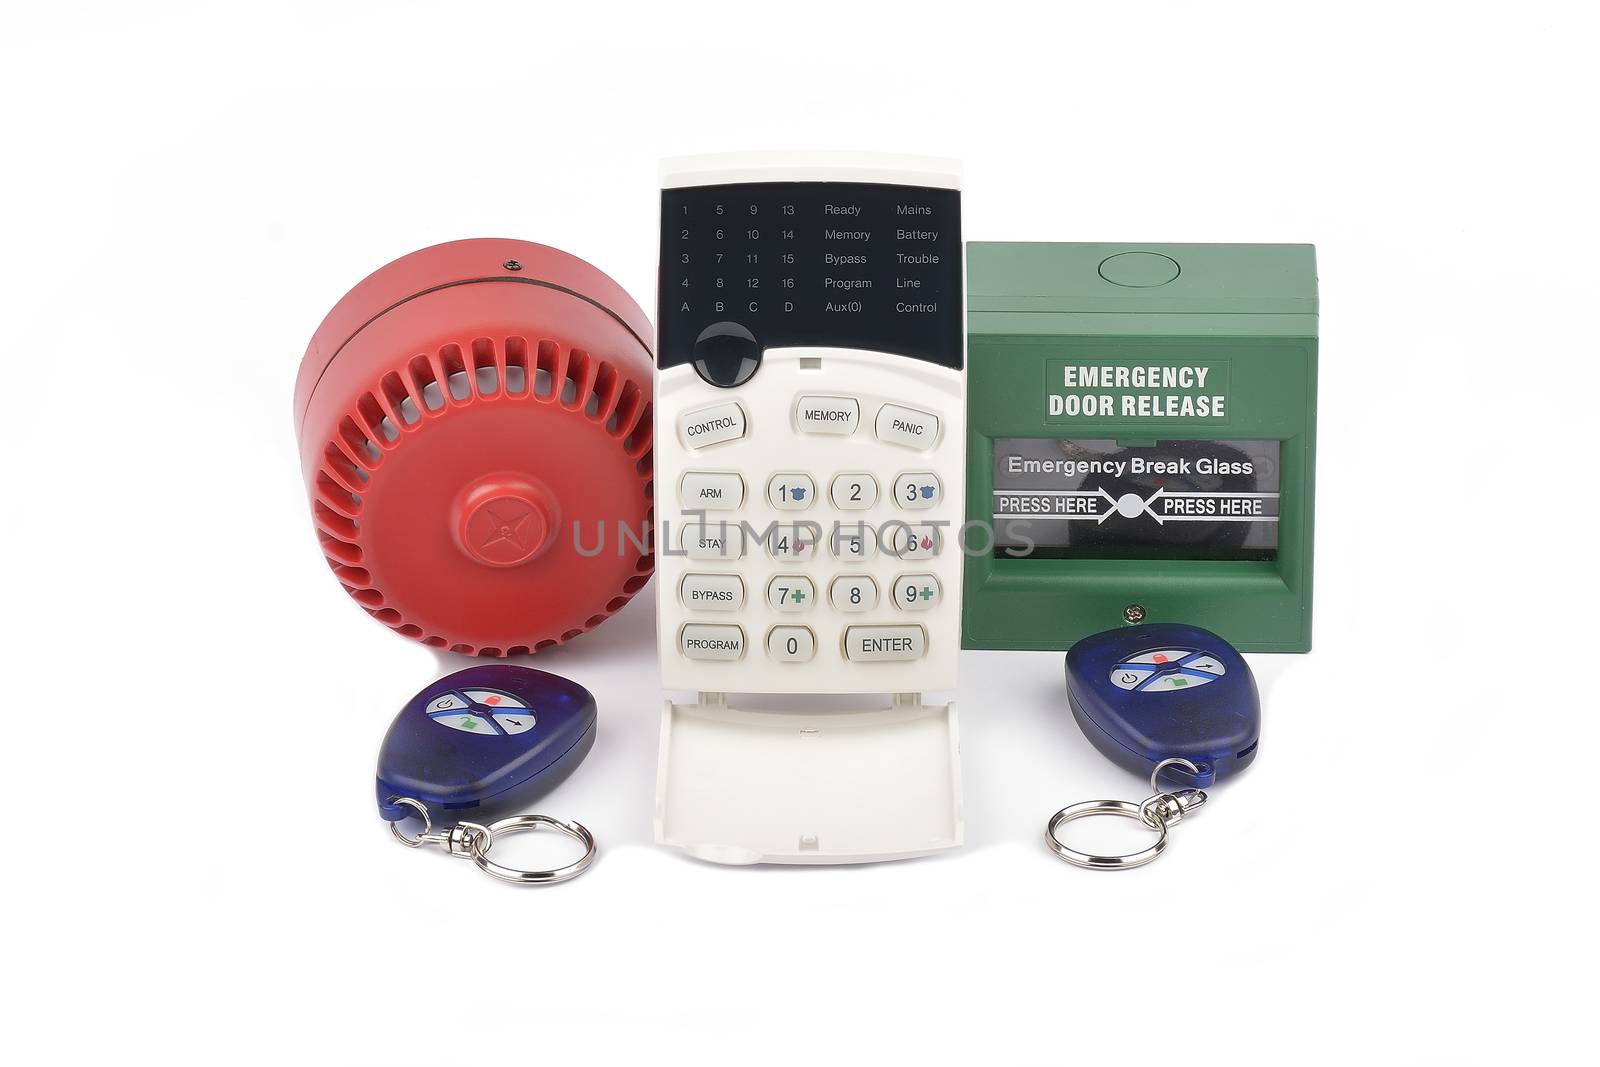 security alarm systems. Industrial or house alarm by constantinhurghea